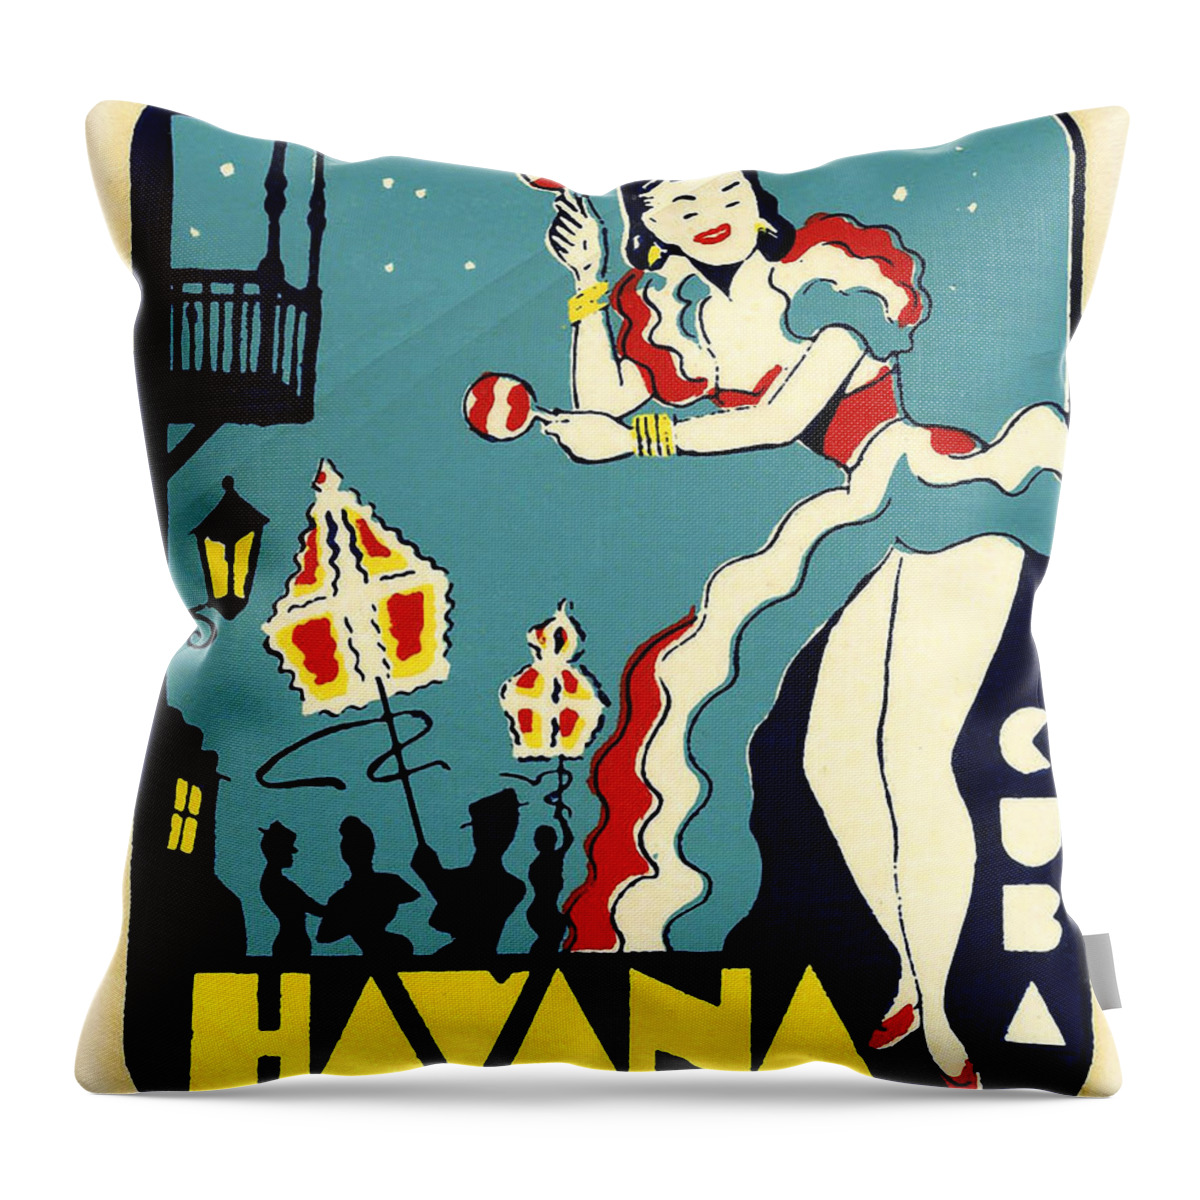 Cuba Throw Pillow featuring the drawing Havana Cuba Decal by Unknown